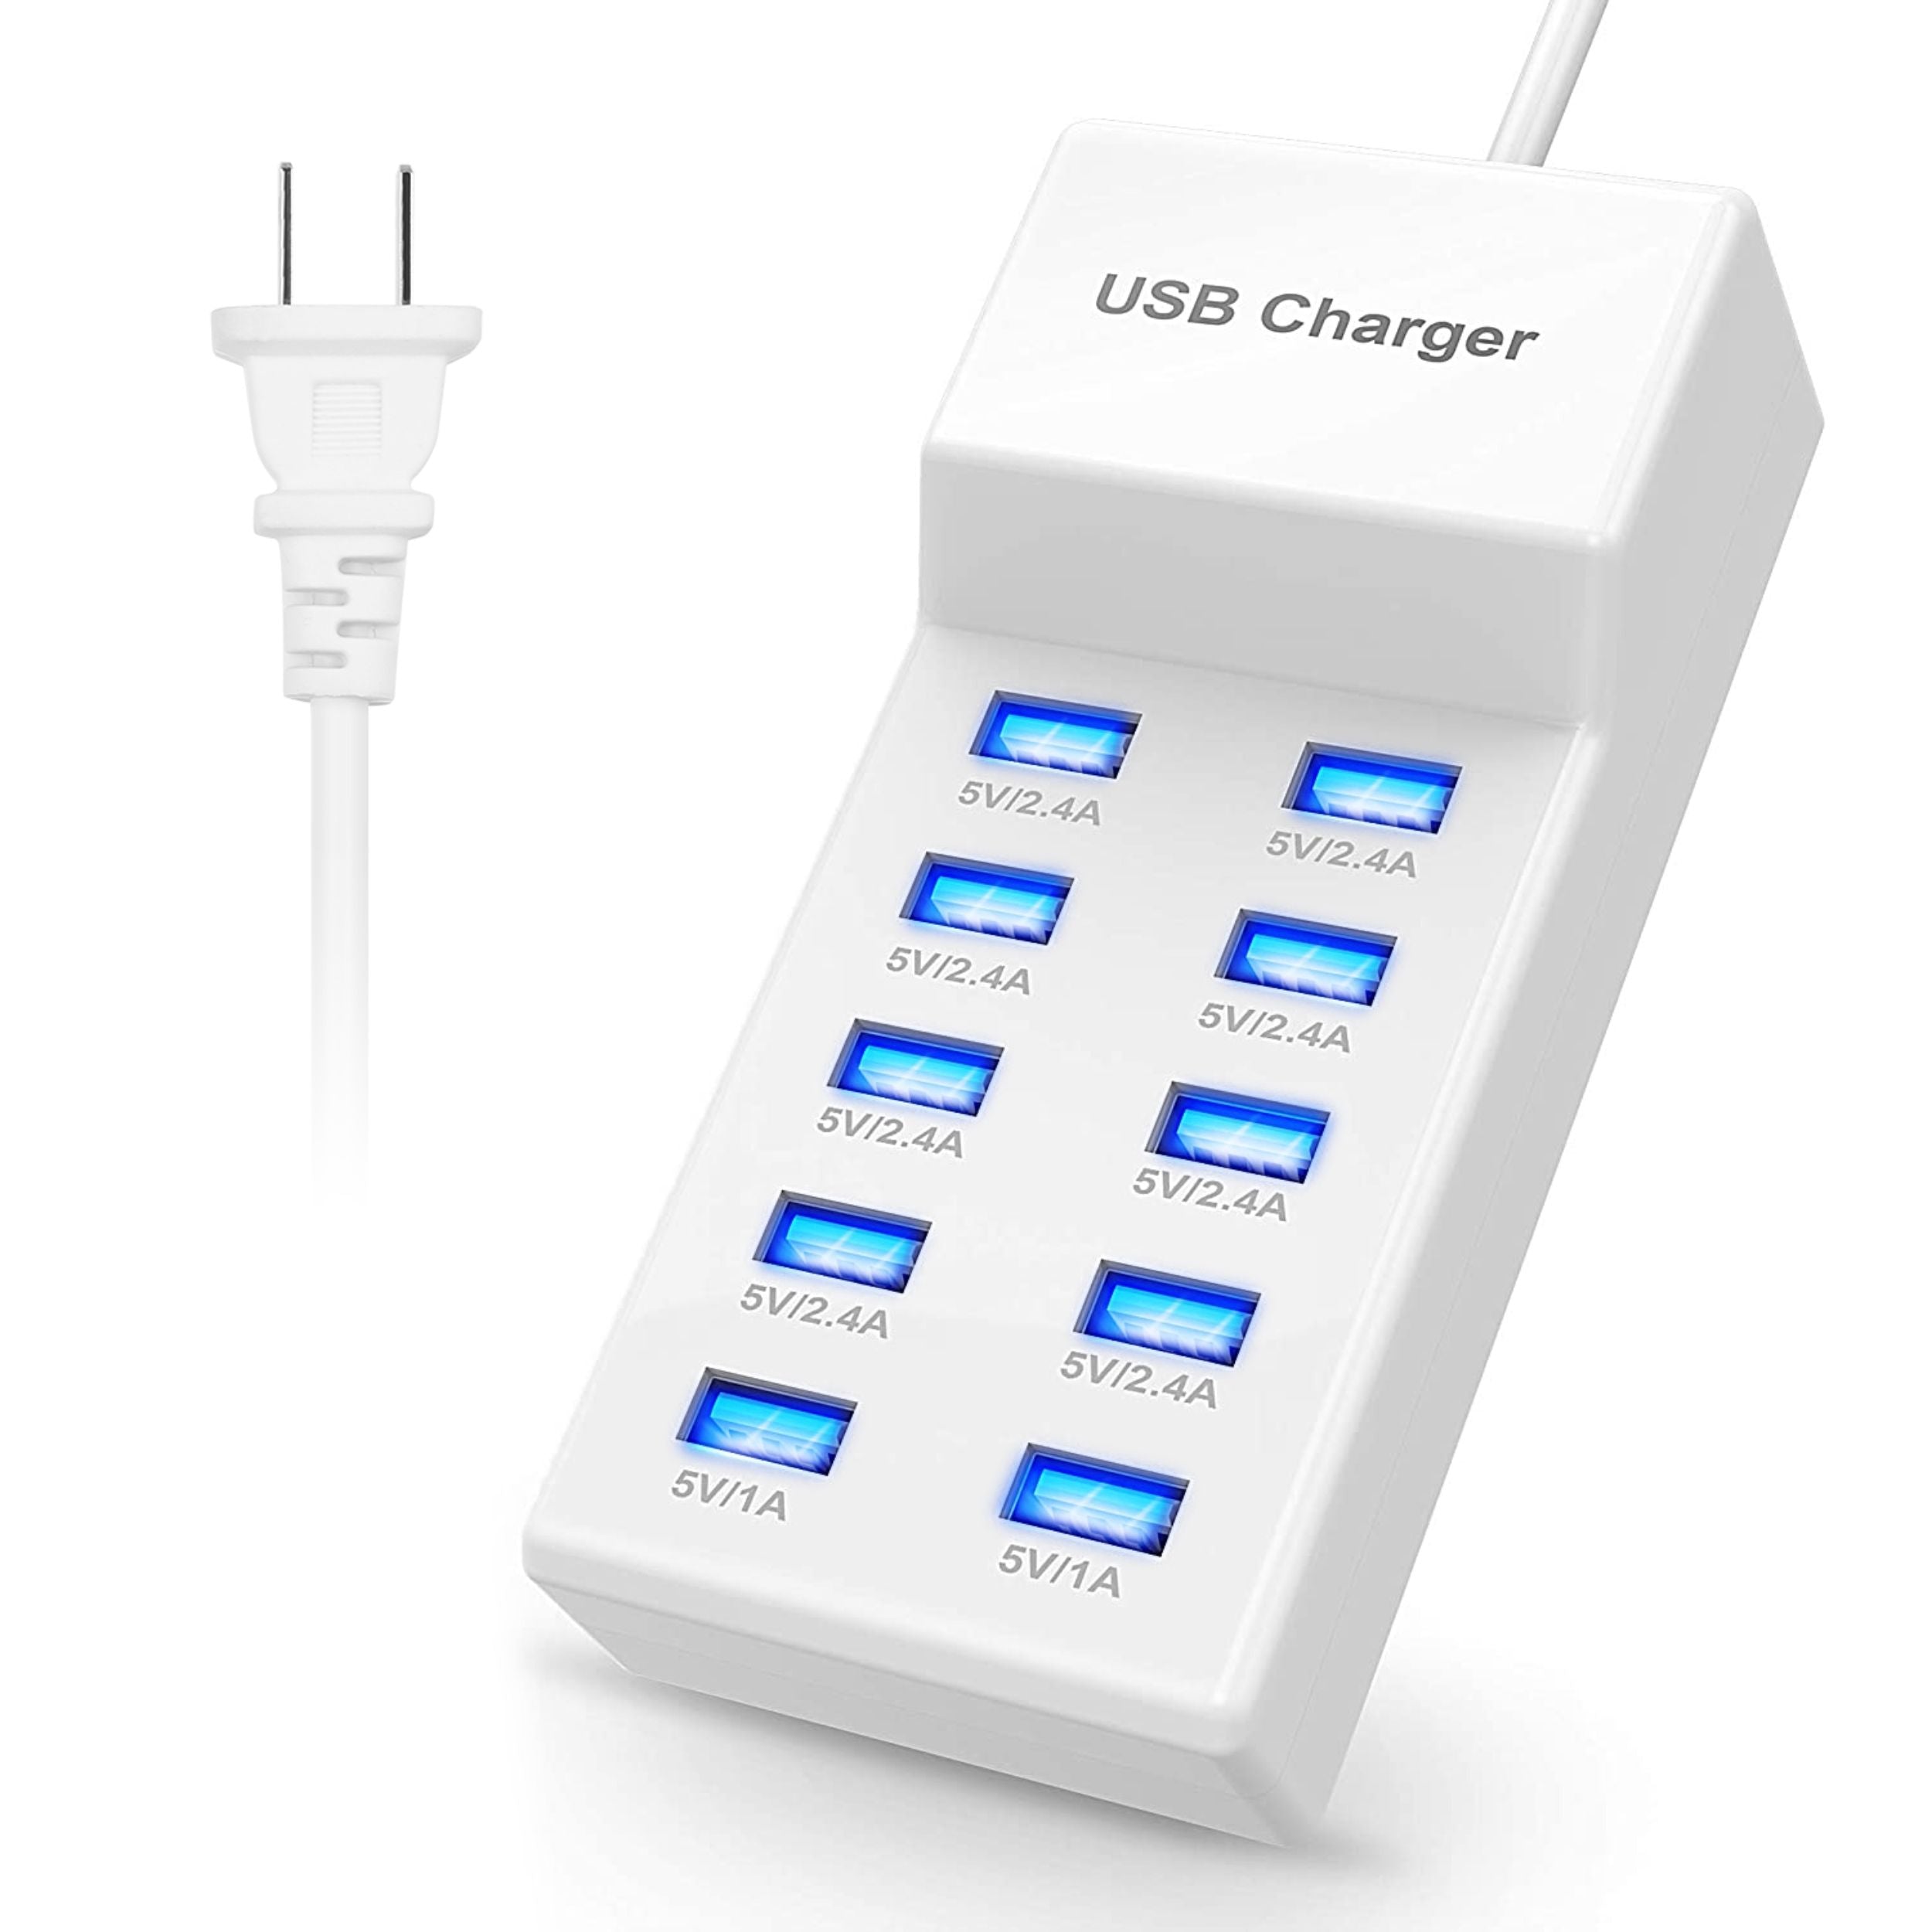 title:10-Port USB Charging Hub: Fast Charge Power Adapter for Phone & Tablet;color:White